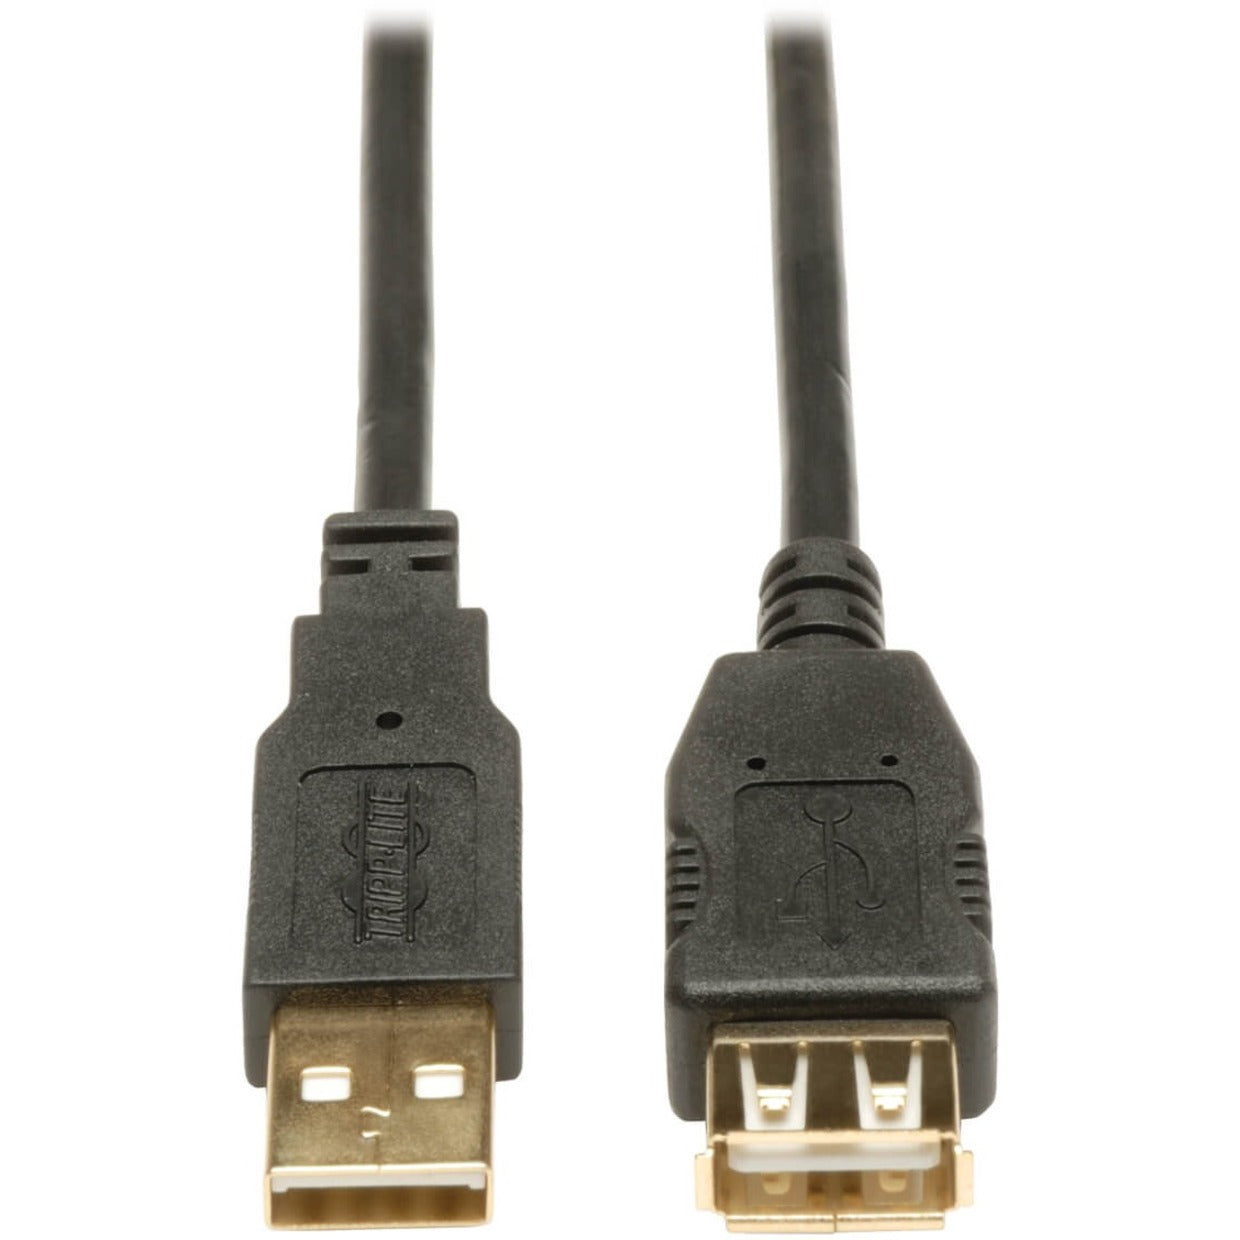 Tripp Lite U024-016 16-ft. USB 2.0 Gold Extension Cable (USB A M/F), Molded, Copper Conductor, Shielded, Black